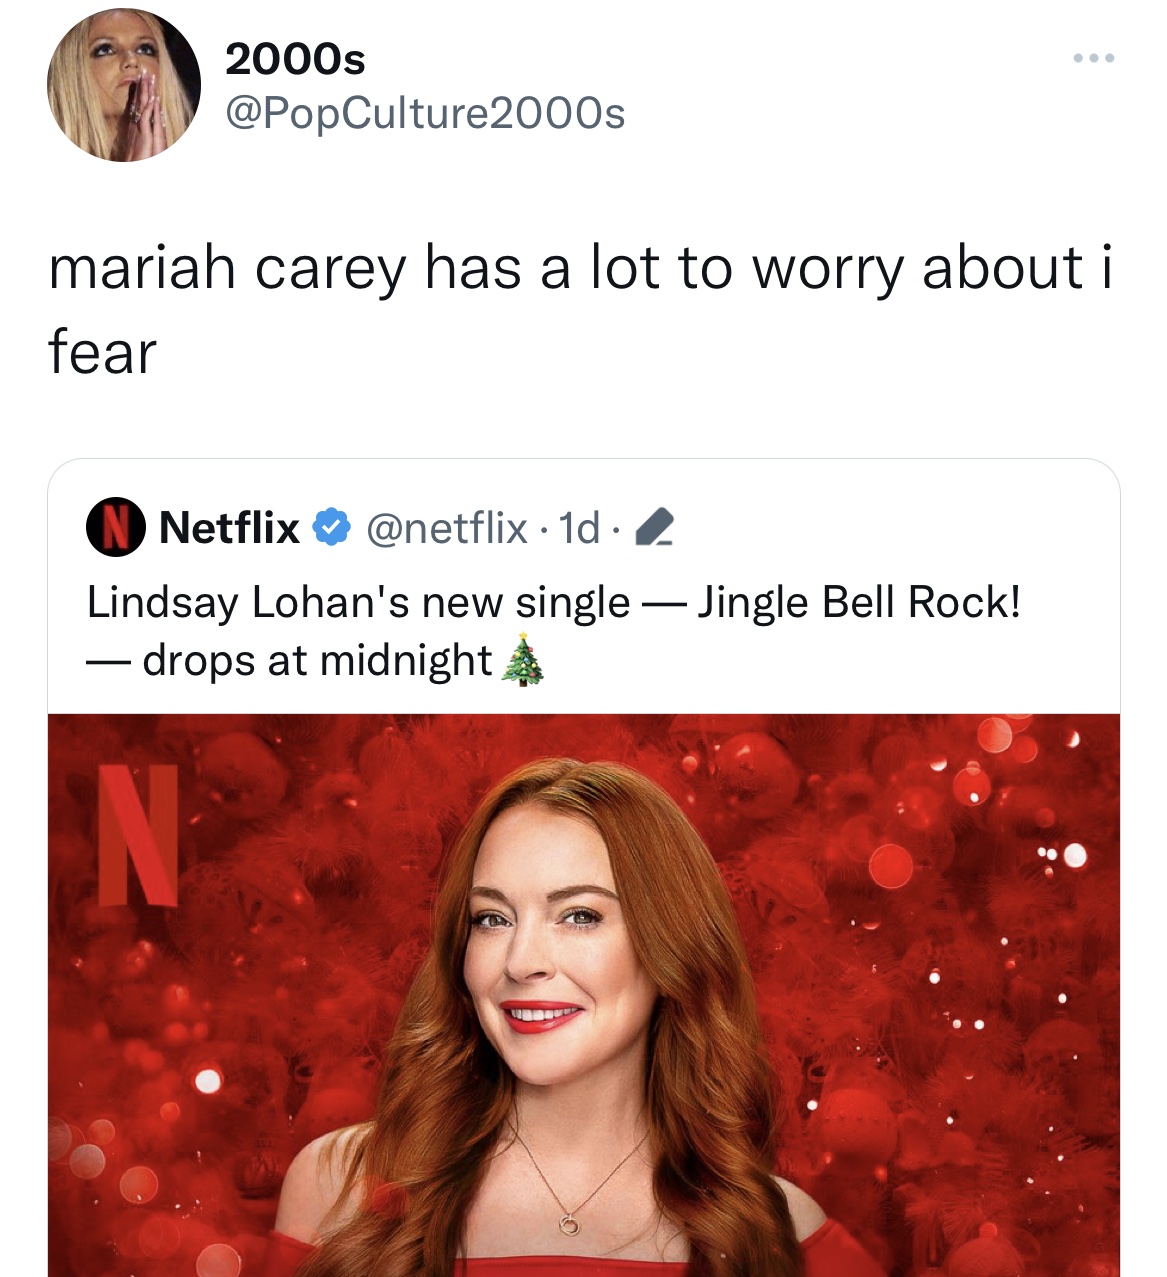 Celeb roasts of the week - Mean Girls - 2000s mariah carey has a lot to worry about i fear Netflix . 1d. Lindsay Lohan's new single Jingle Bell Rock! drops at midnight N